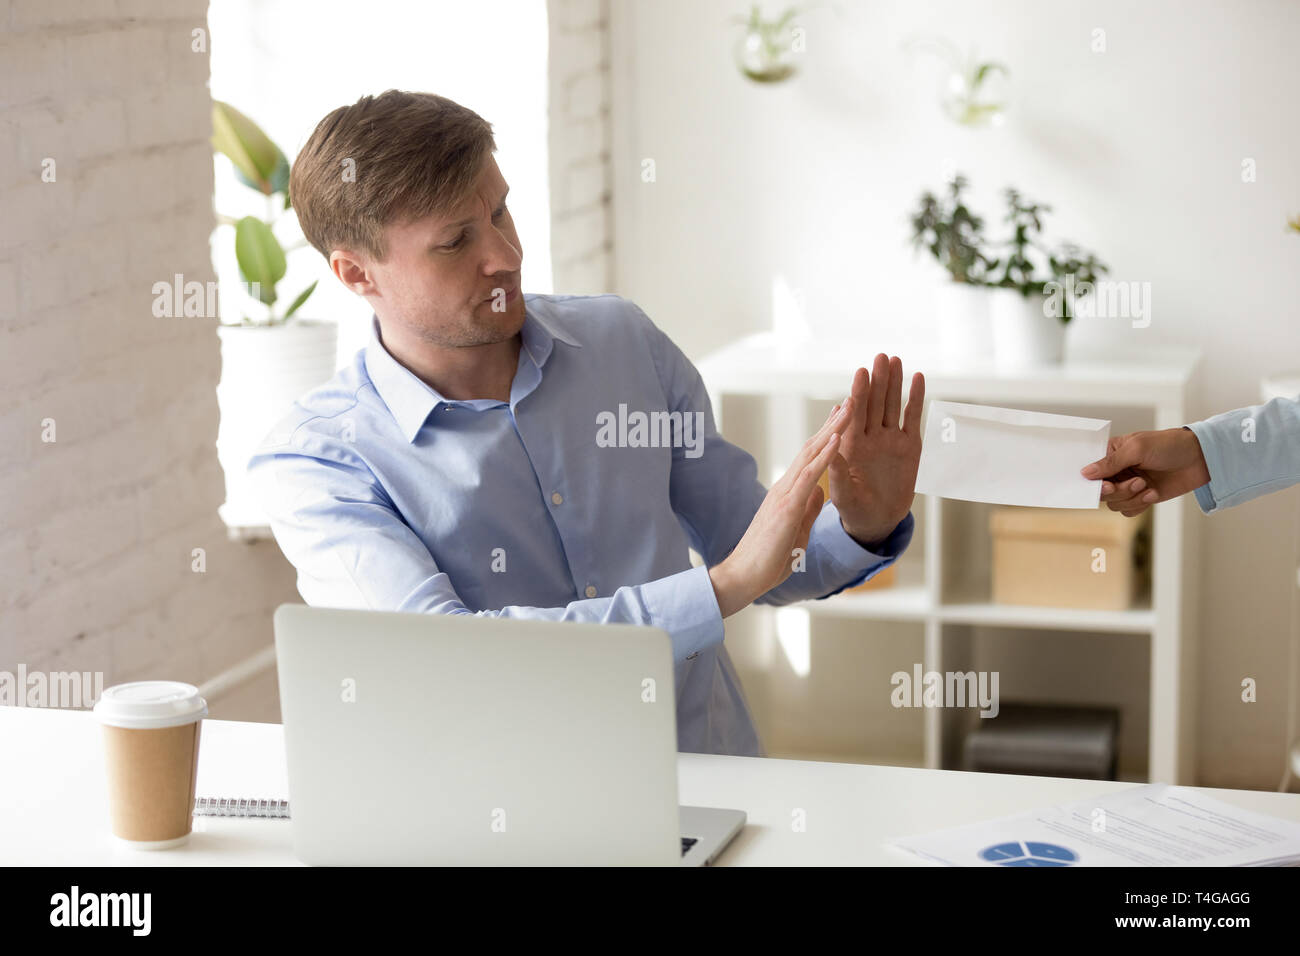 Bussiness man refuses to accept bribery envelope Stock Photo